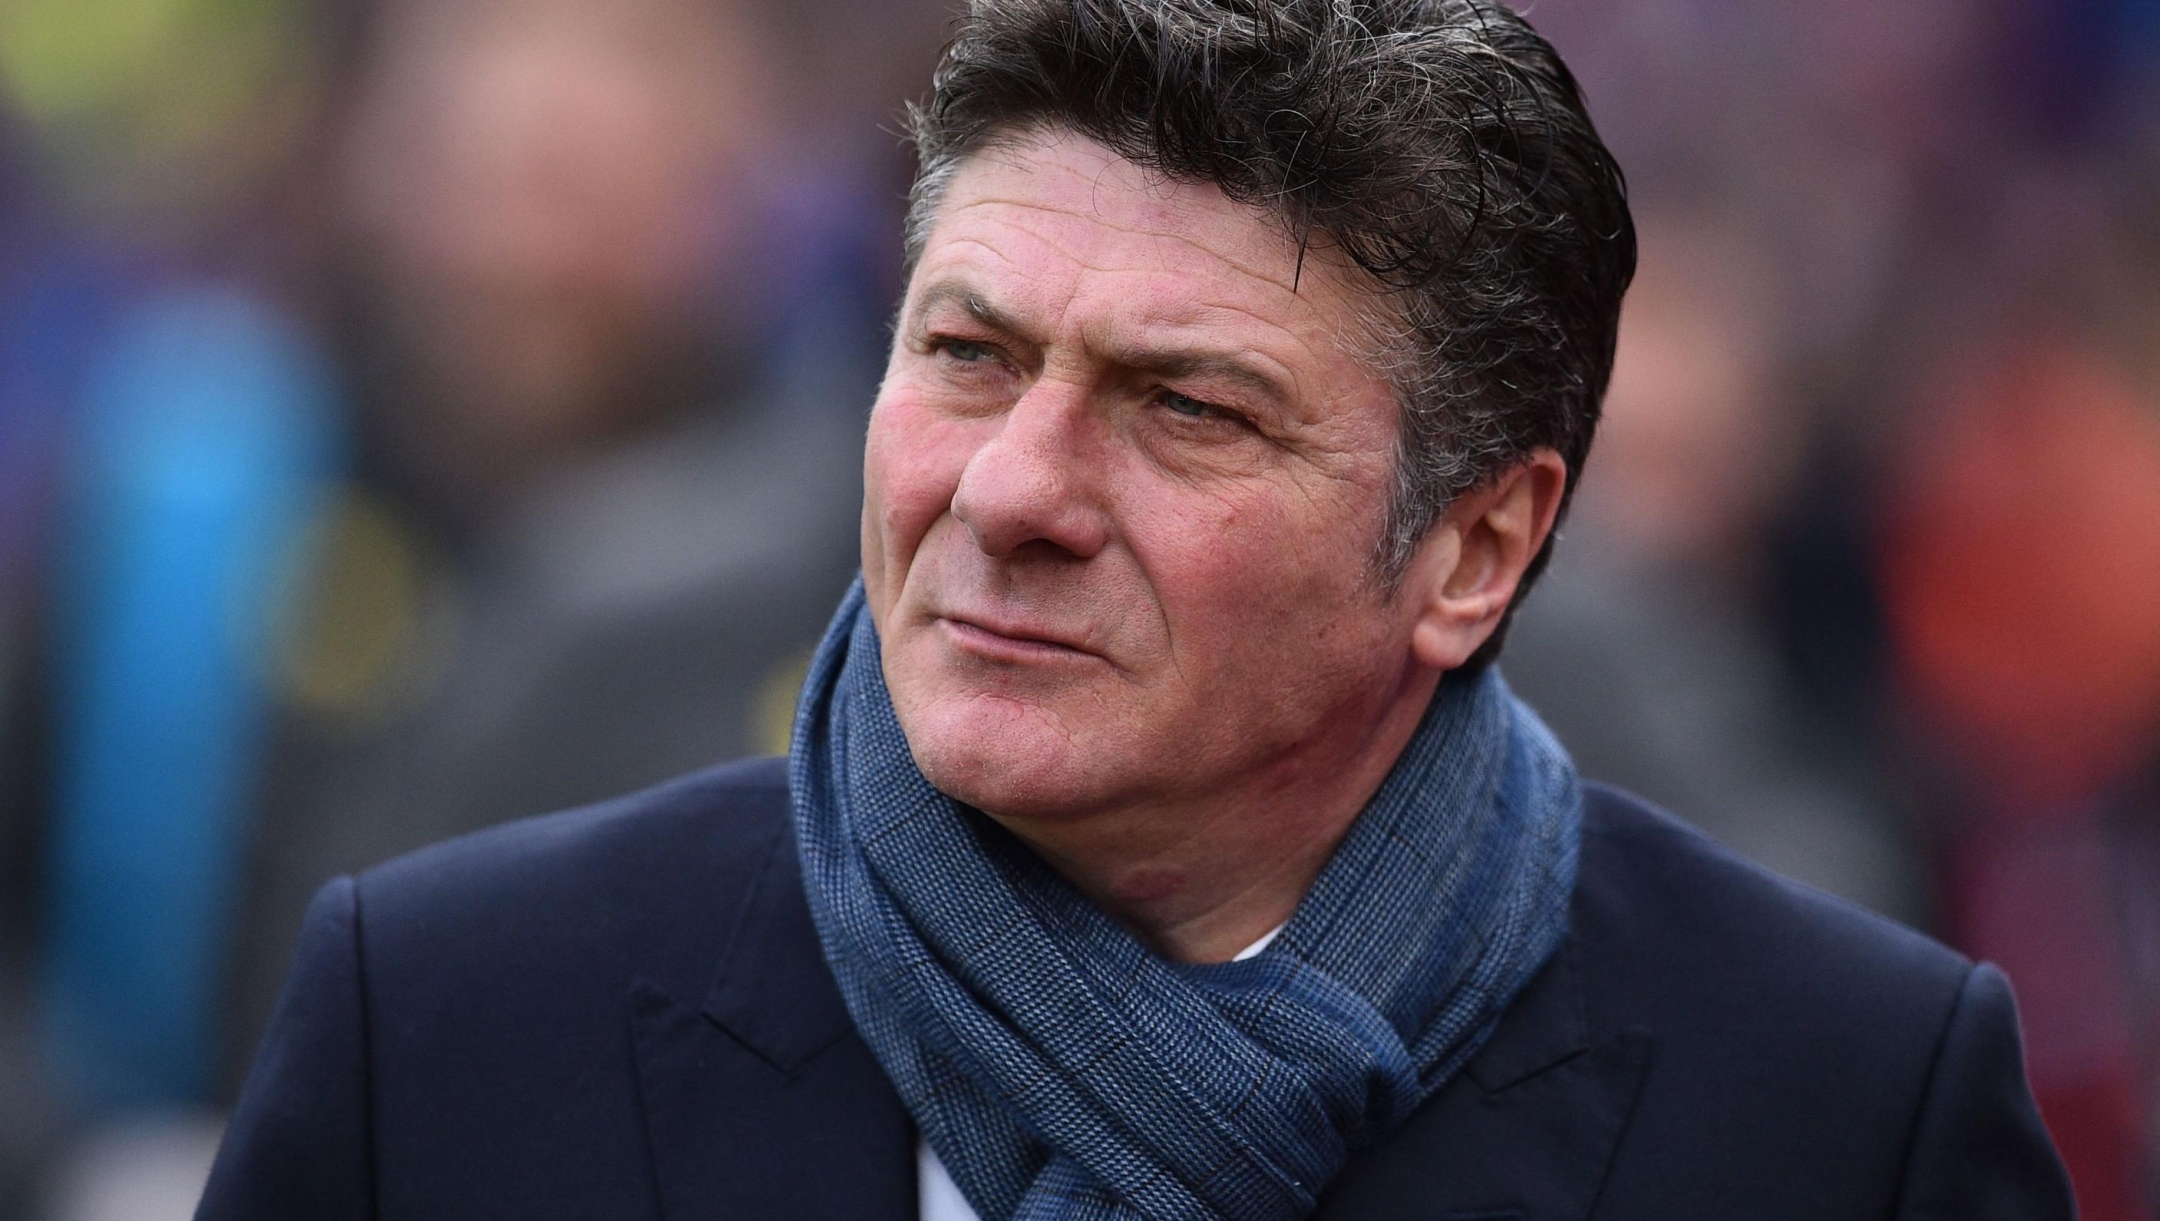 (FILES) Watford's Italian head coach Walter Mazzarri arrives for the English Premier League football match between Crystal Palace and Watford at Selhurst Park in south London on March 18, 2017. Rudi Garcia has been sacked by Napoli, the Italian champions announced on November 14, 2023 after a poor start to the season left their Serie A title defence floundering. Napoli said that Walter Mazzarri returns after a decade to replace Frenchman Garcia, who was dismissed for allowing the team to fall ten points behind league leaders Inter Milan. (Photo by Glyn KIRK / AFP) / RESTRICTED TO EDITORIAL USE. No use with unauthorized audio, video, data, fixture lists, club/league logos or 'live' services. Online in-match use limited to 75 images, no video emulation. No use in betting, games or single club/league/player publications. /